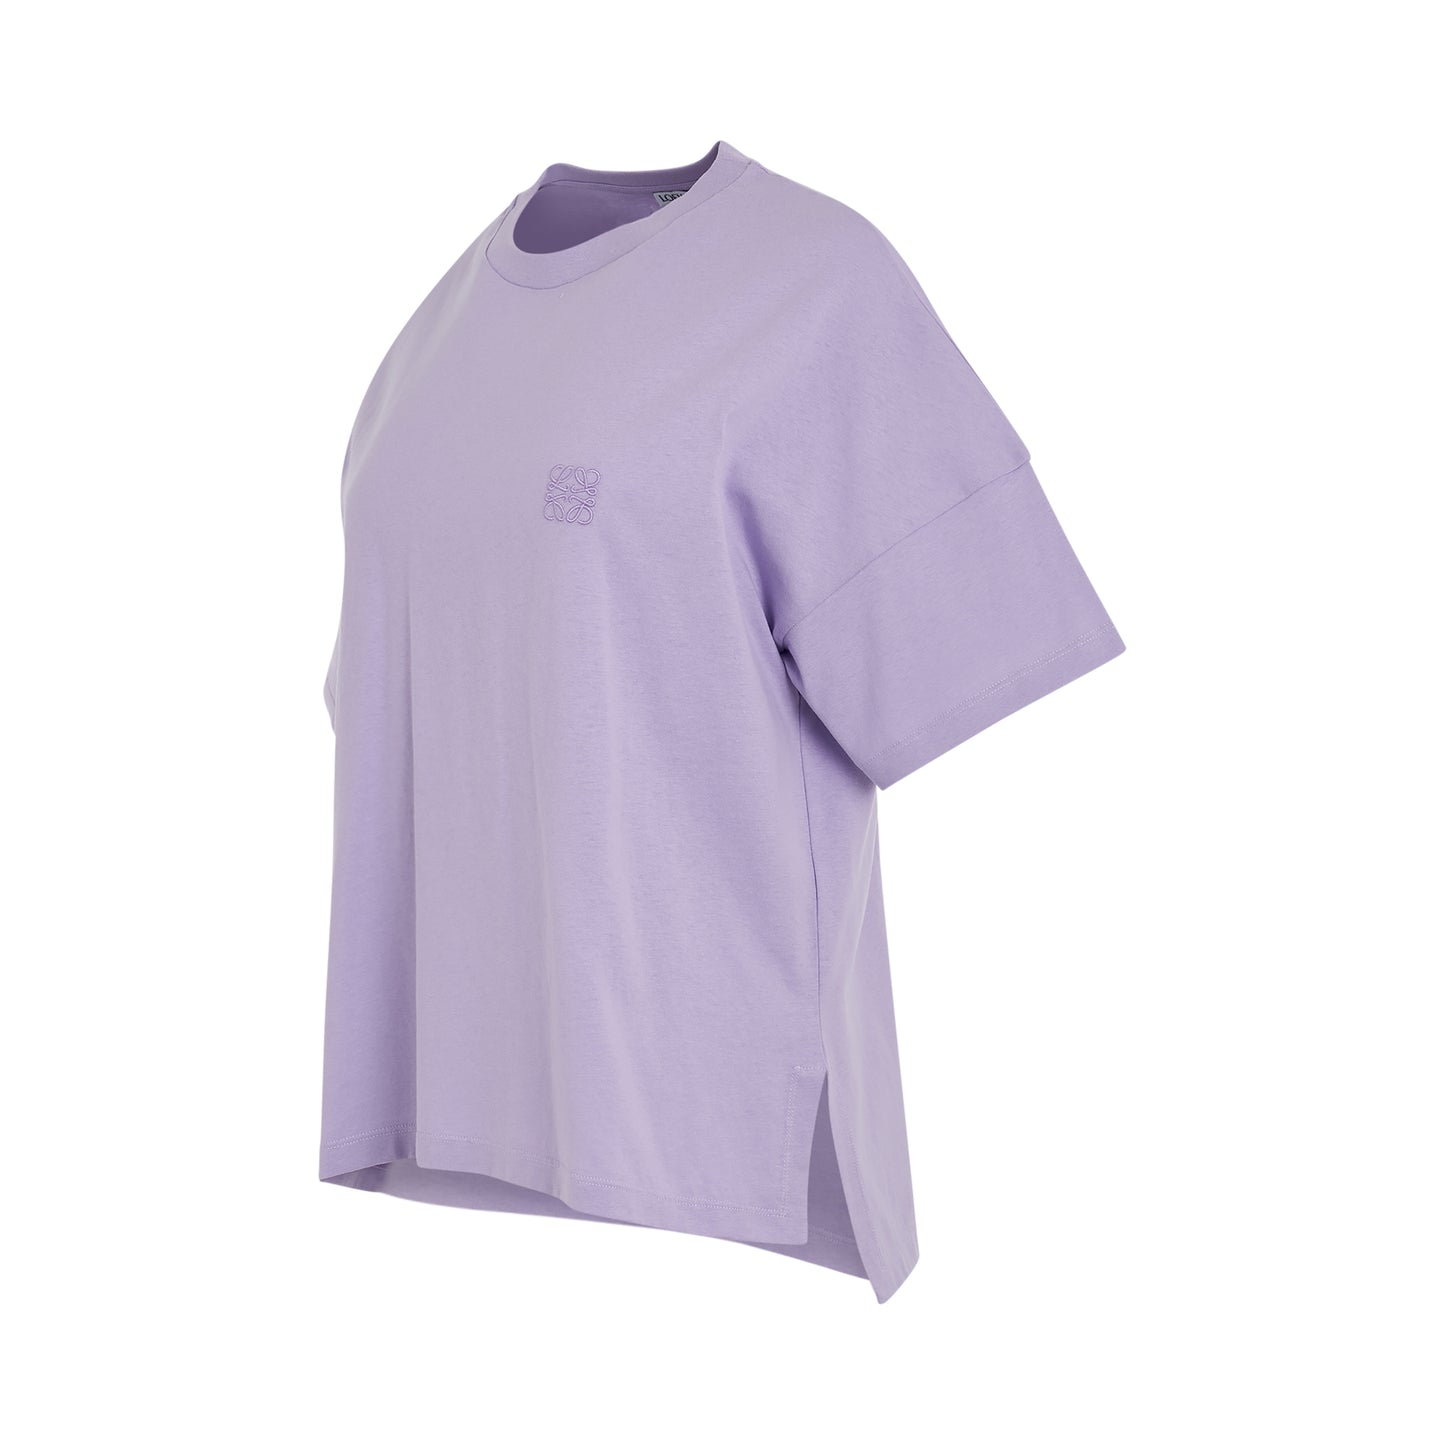 Anagram Boxy Fit T-Shirt in Baby Lilac